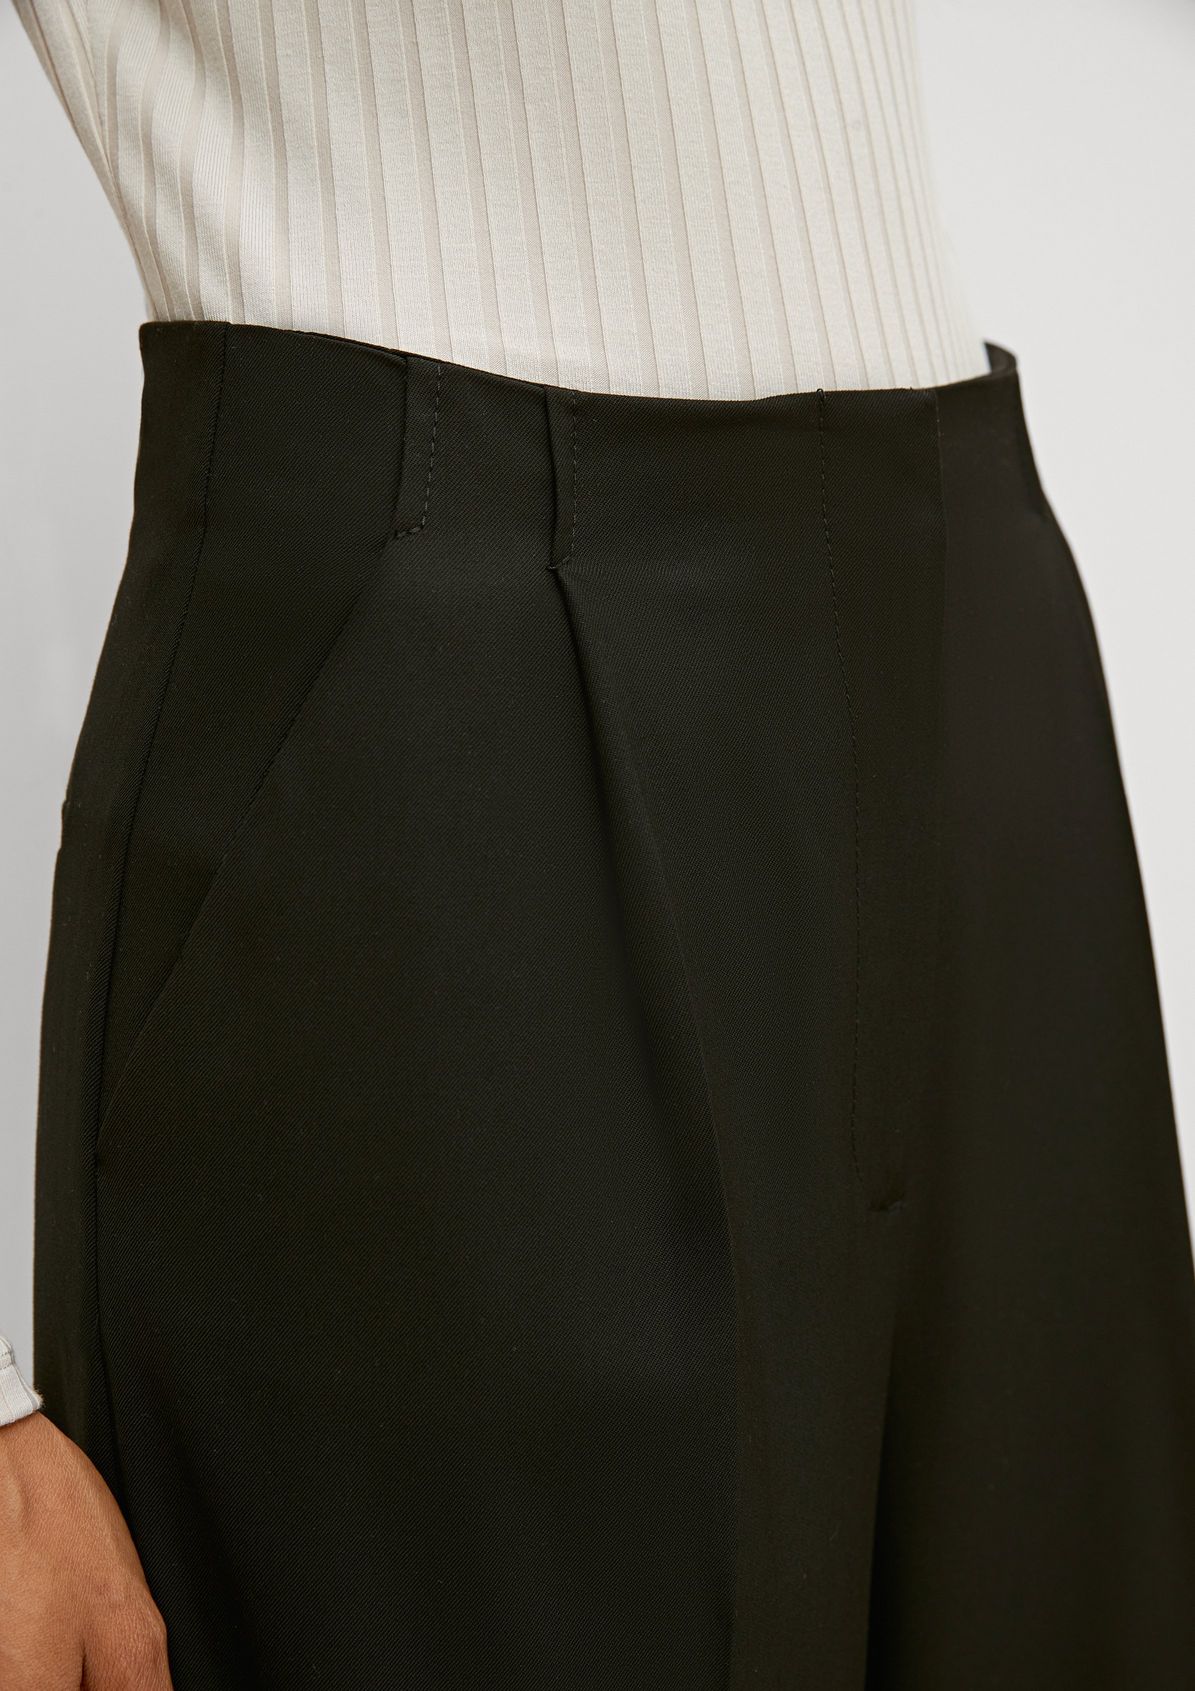 Regular fit: trousers with a wide Palazzo leg from comma